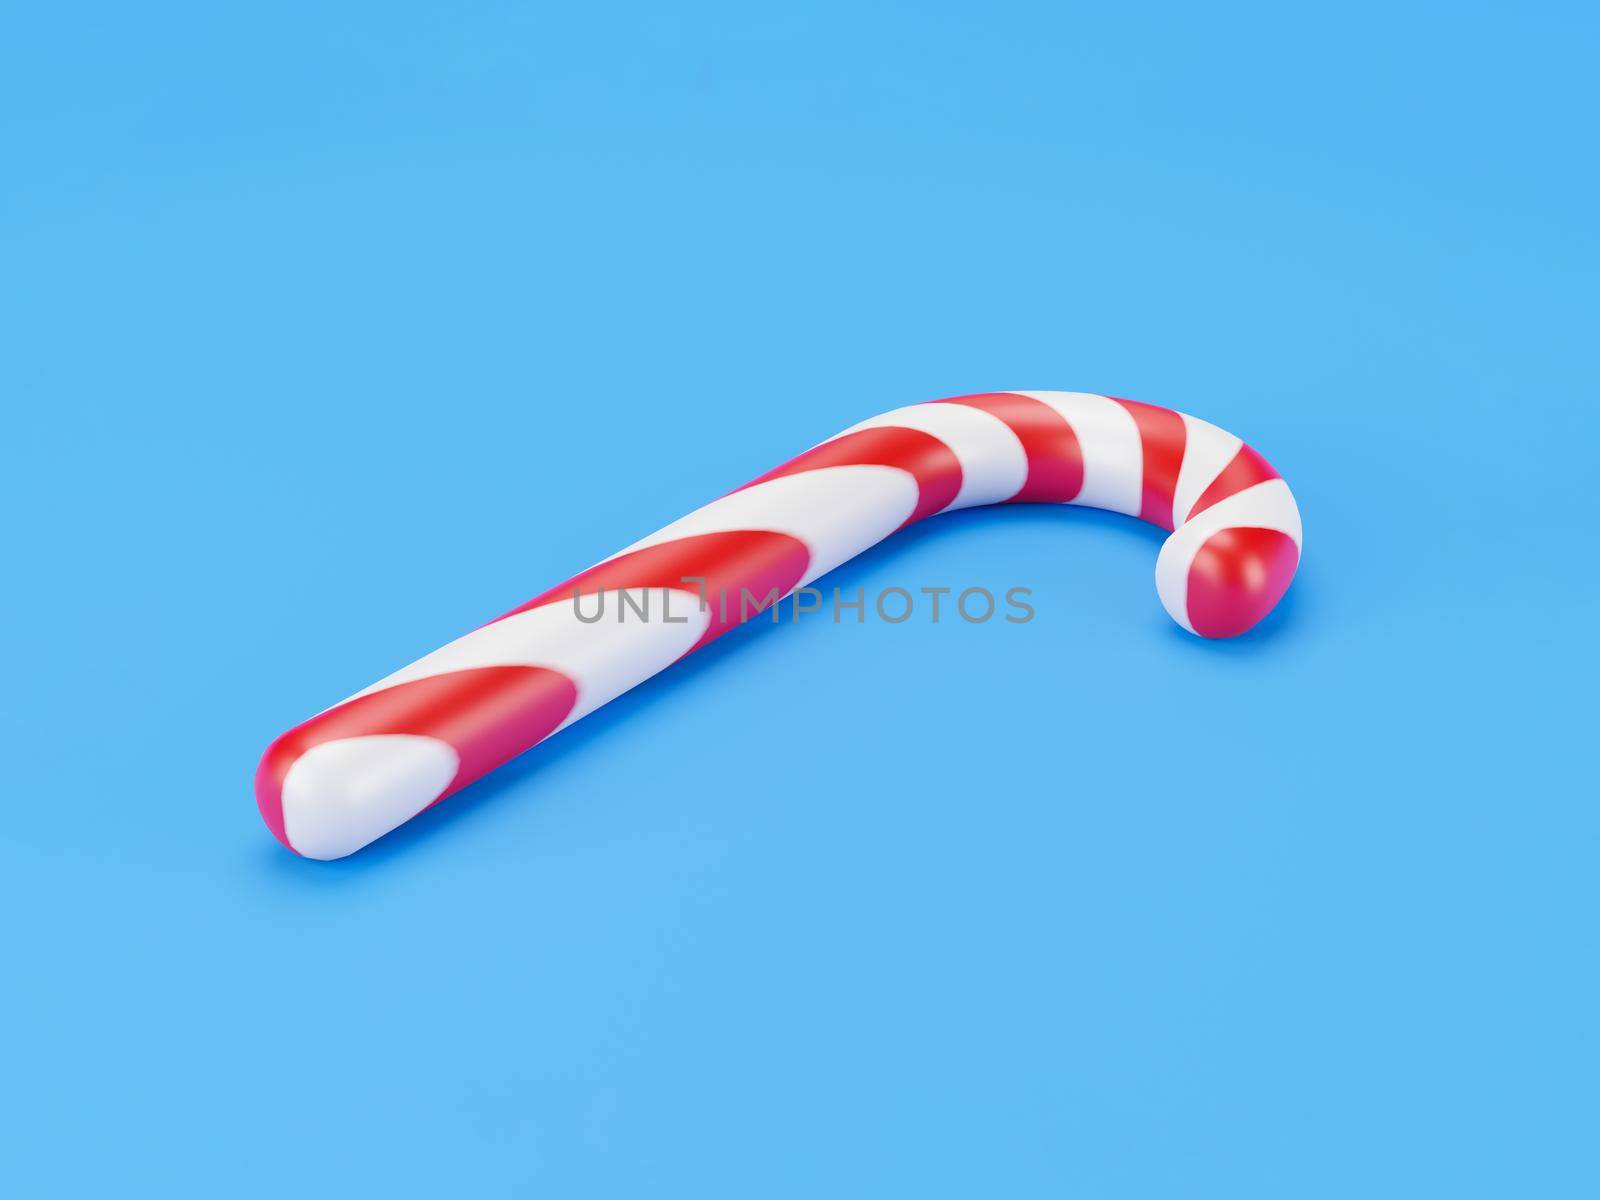 Merry Christmas canes, lollipop mint candy with red stripes on blue background. New Years celebration concept. Traditional sweet dessert. 3d render